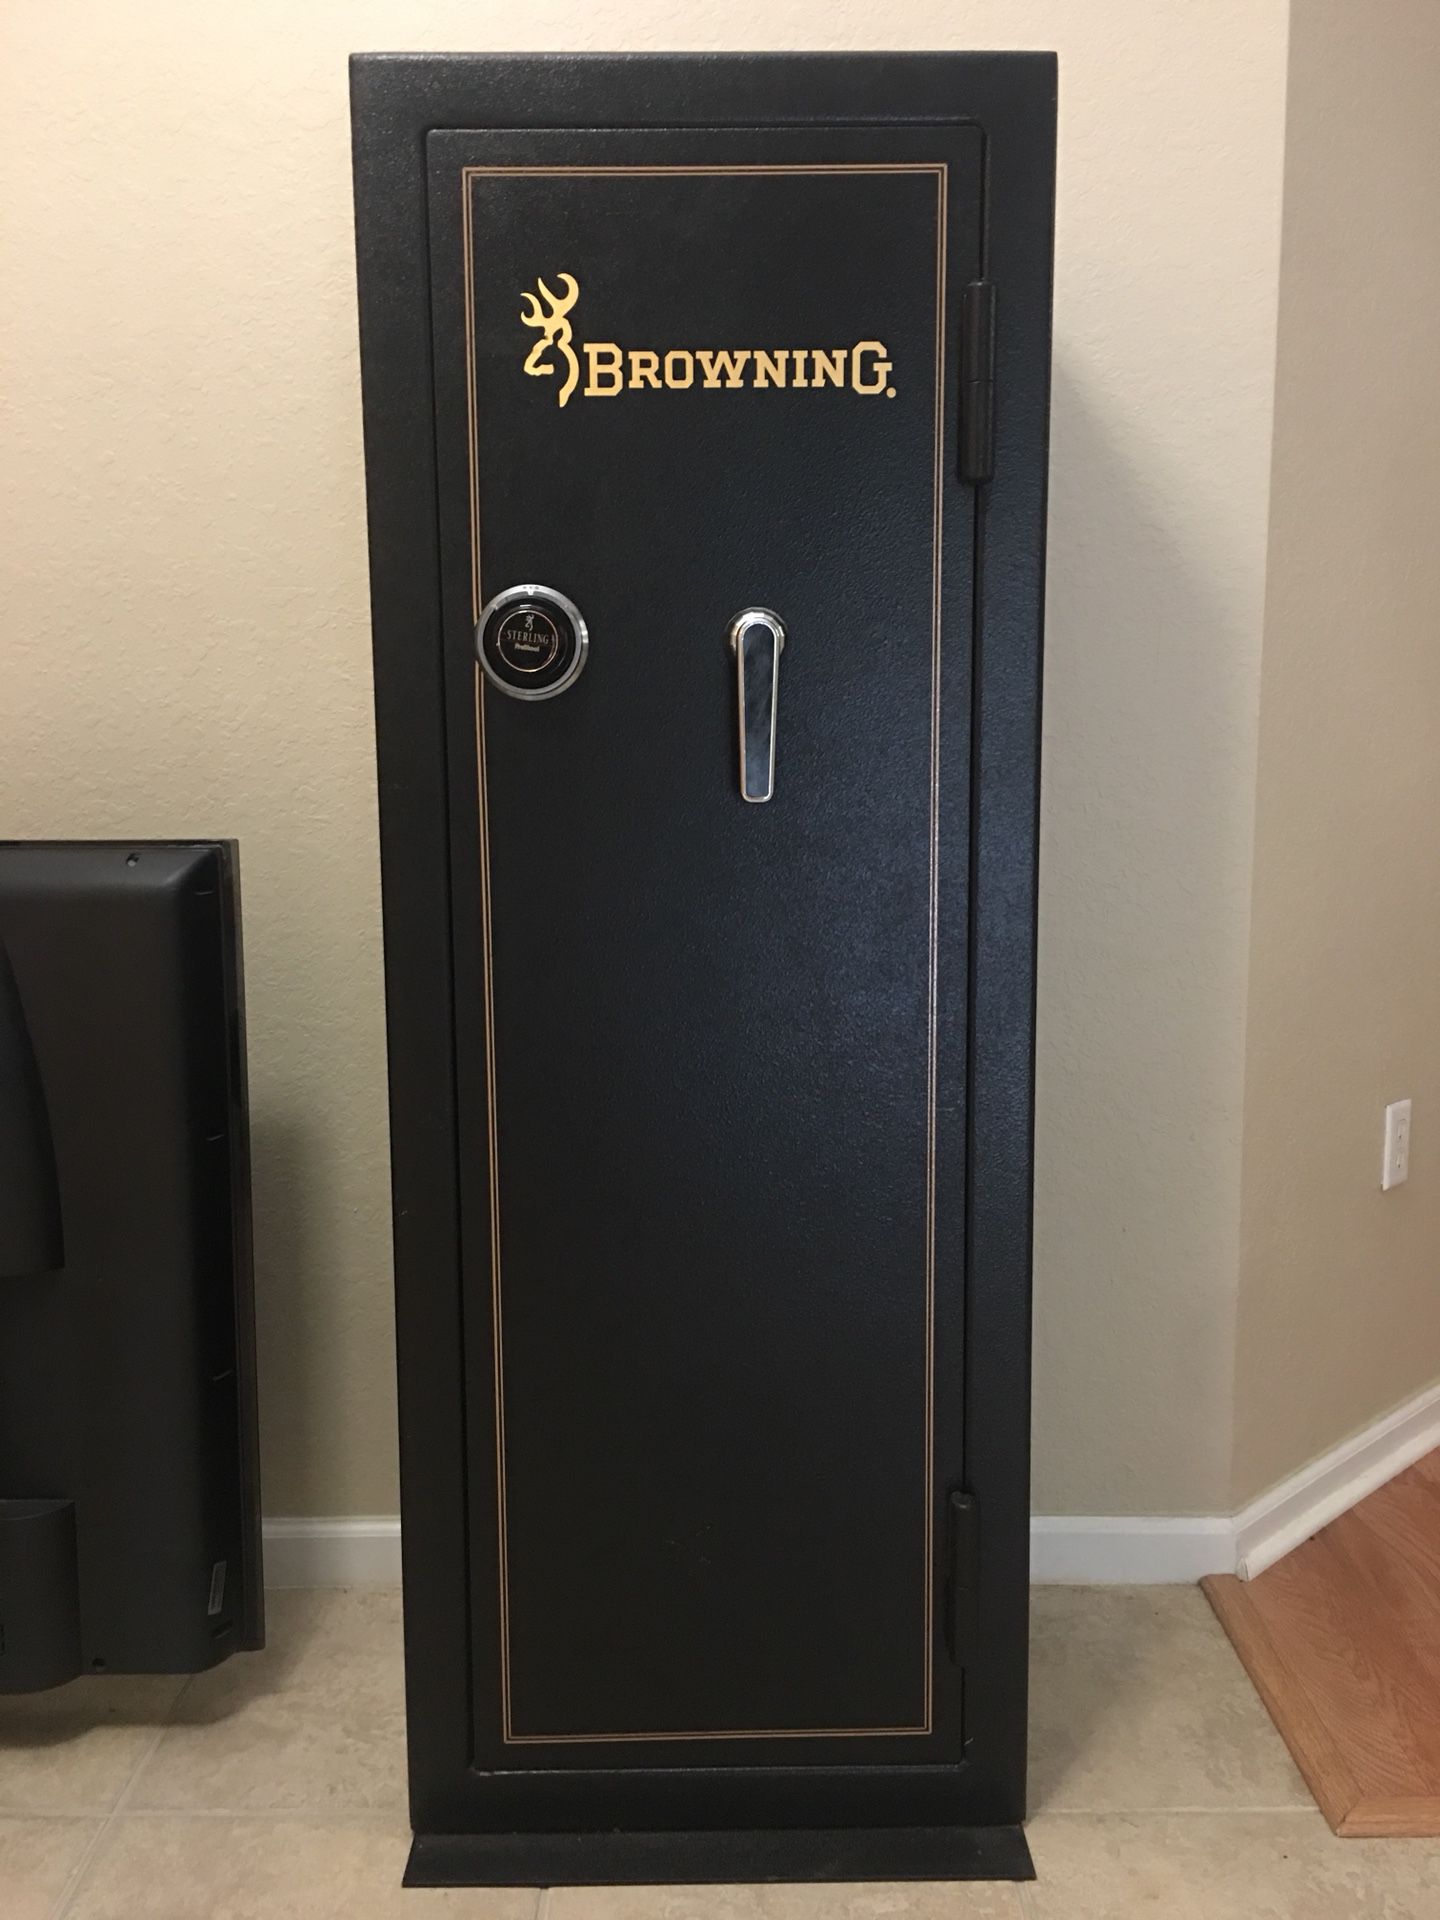 Browning Gun Safe Sterling Series s6215 like new